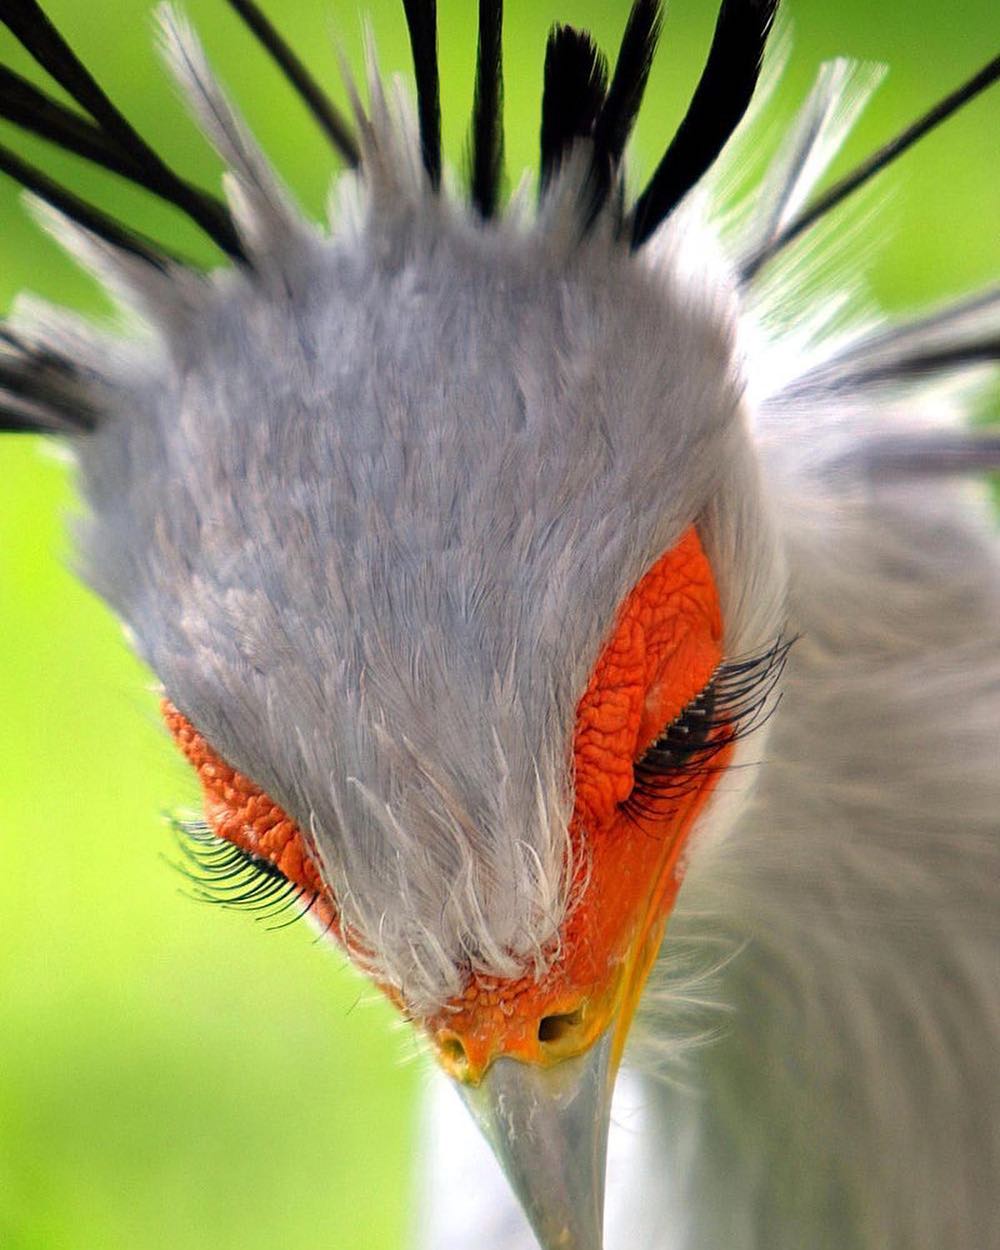 Maybe you’ve heard about the Secretary Bird before, but you have hardly ever seen its eyelashes.